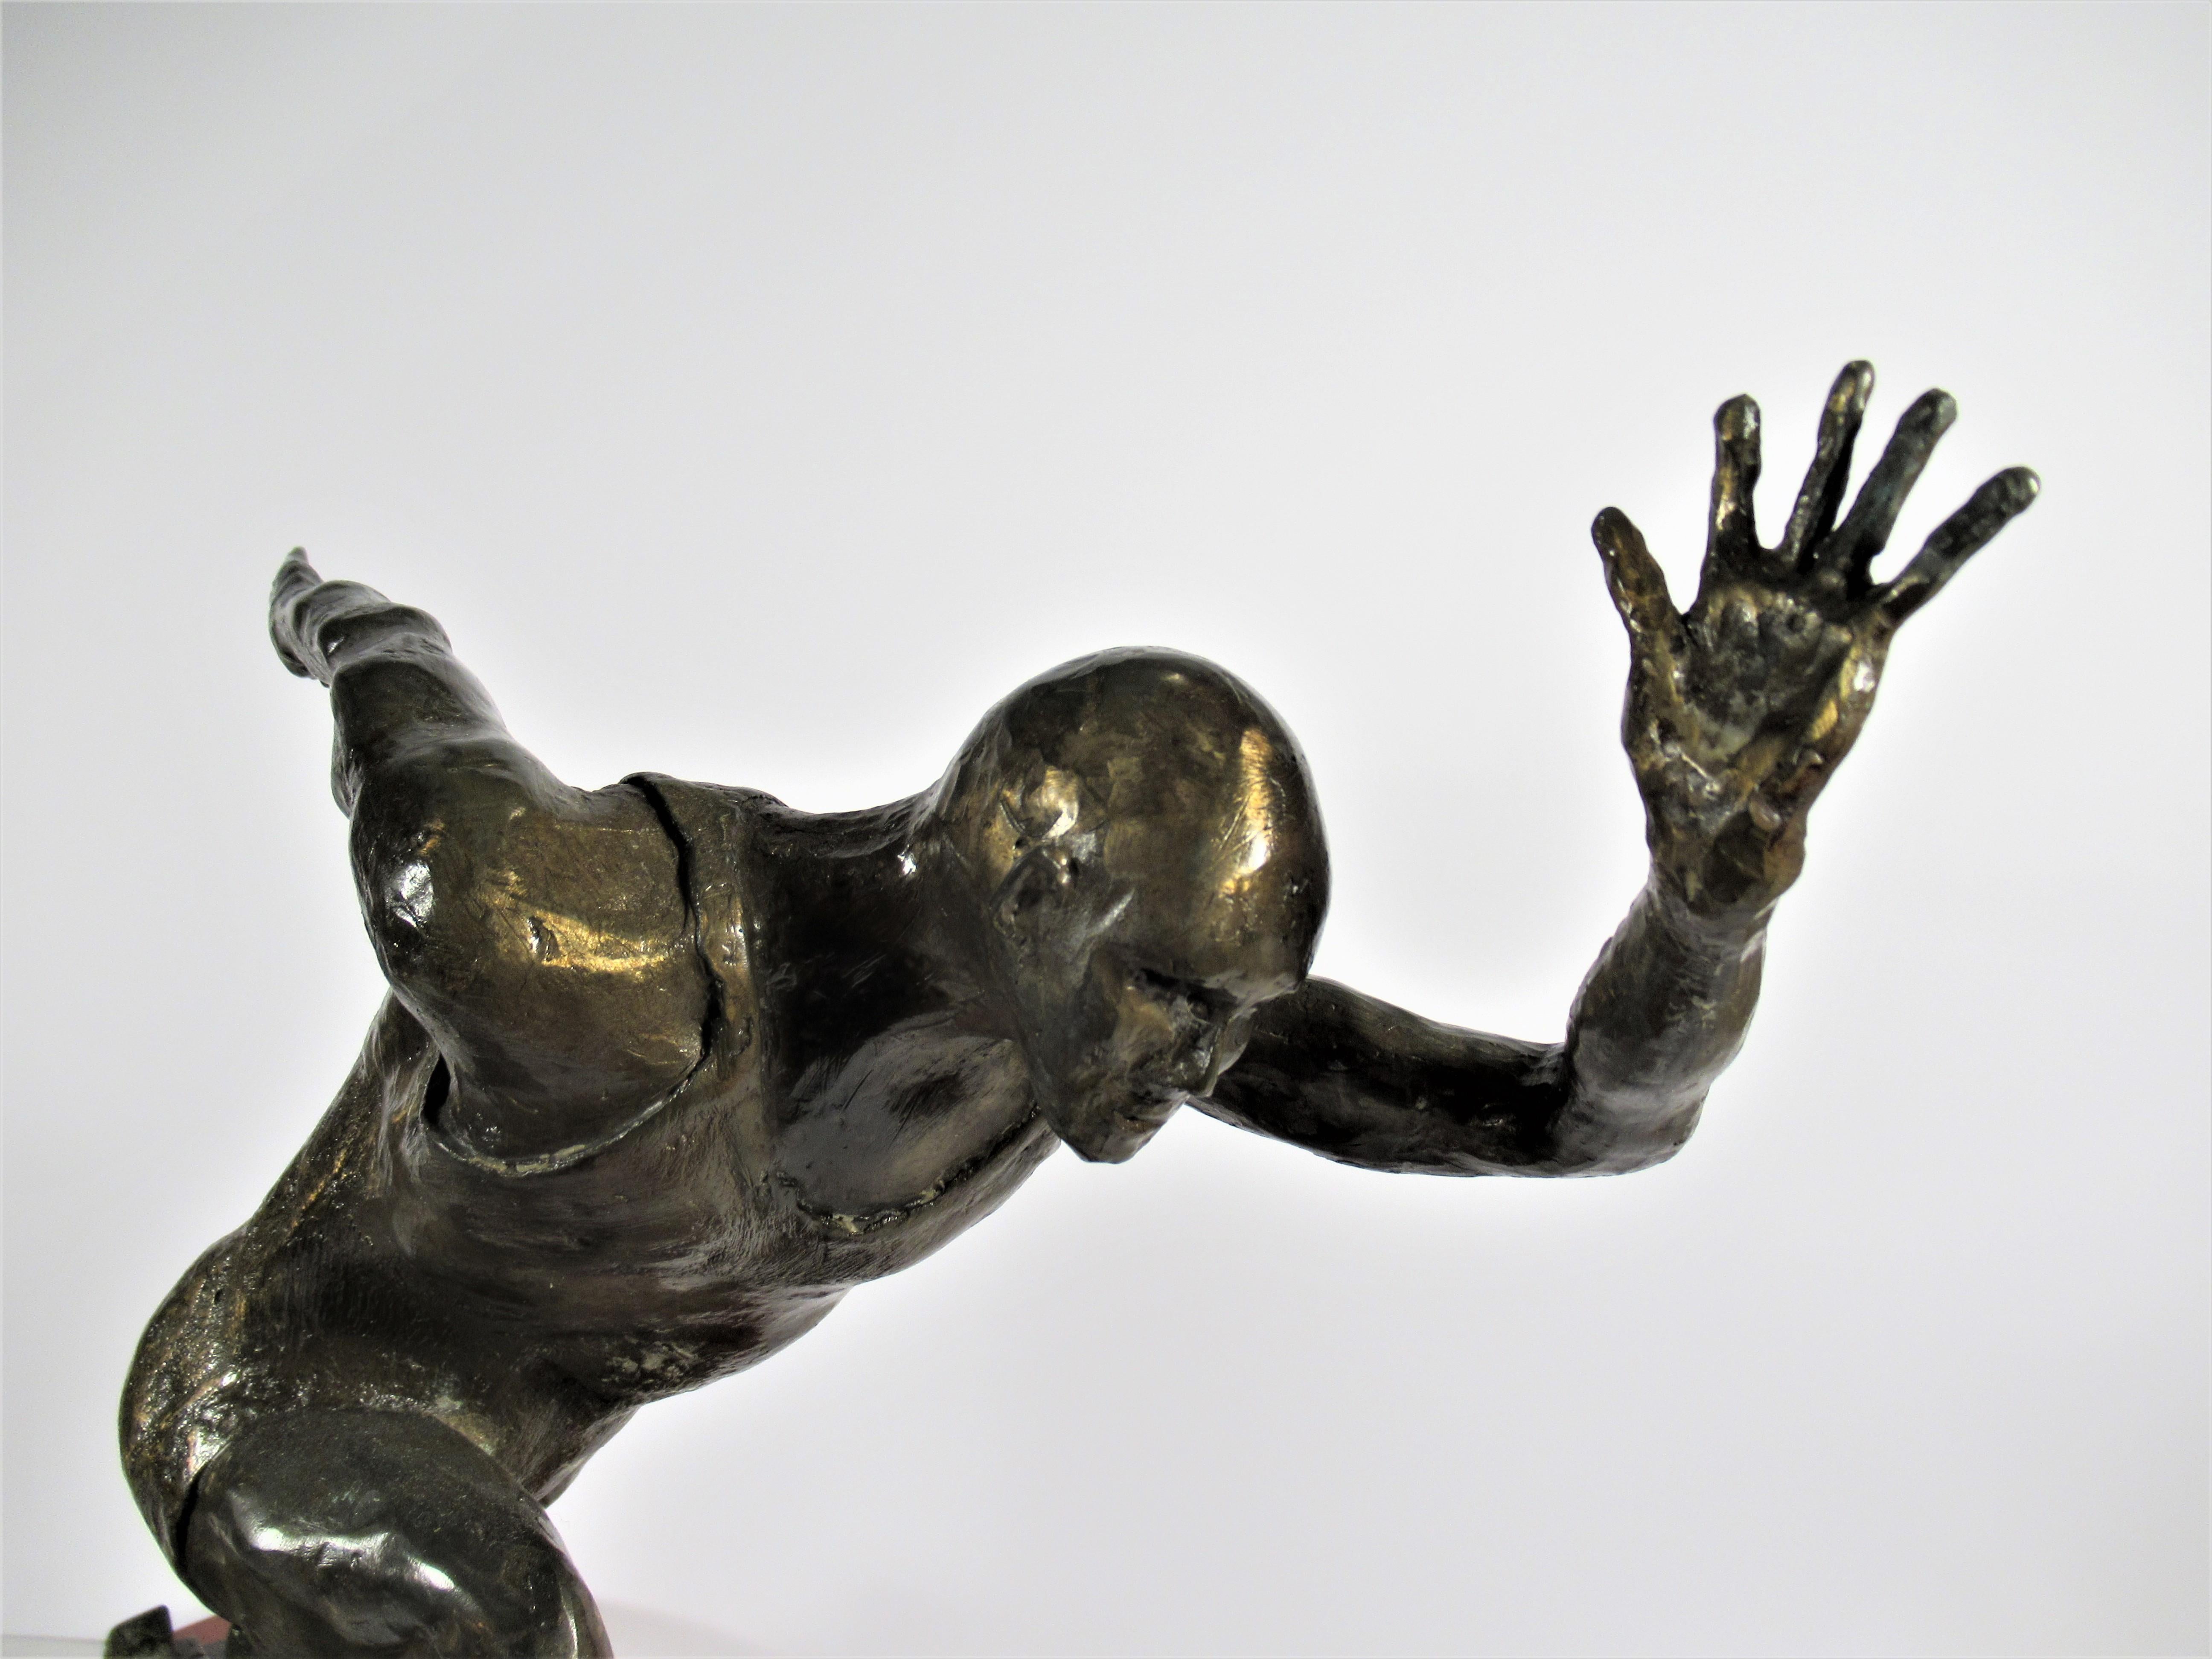 The Athlete and his Coach - American Realist Sculpture by Kenneth Johnson